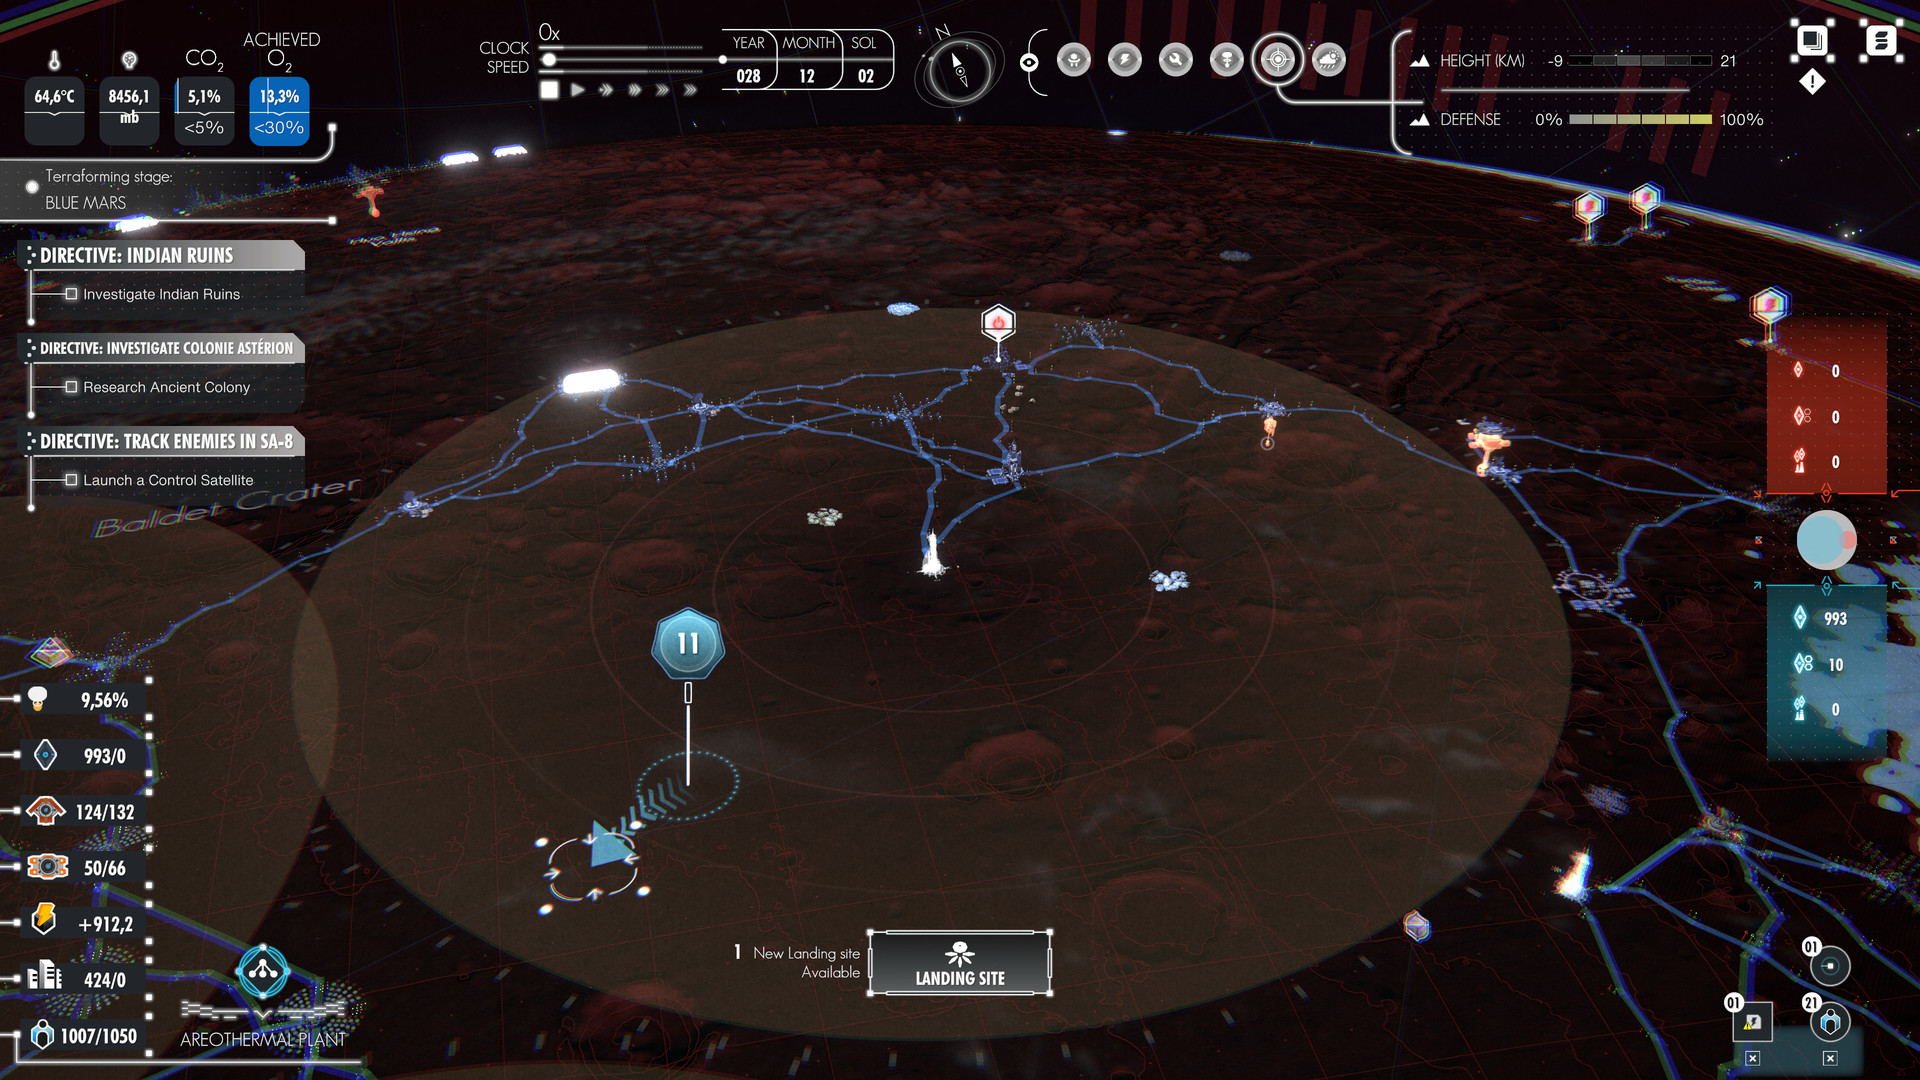 An image of mars colonization efforts from the videogame Per Aspera.